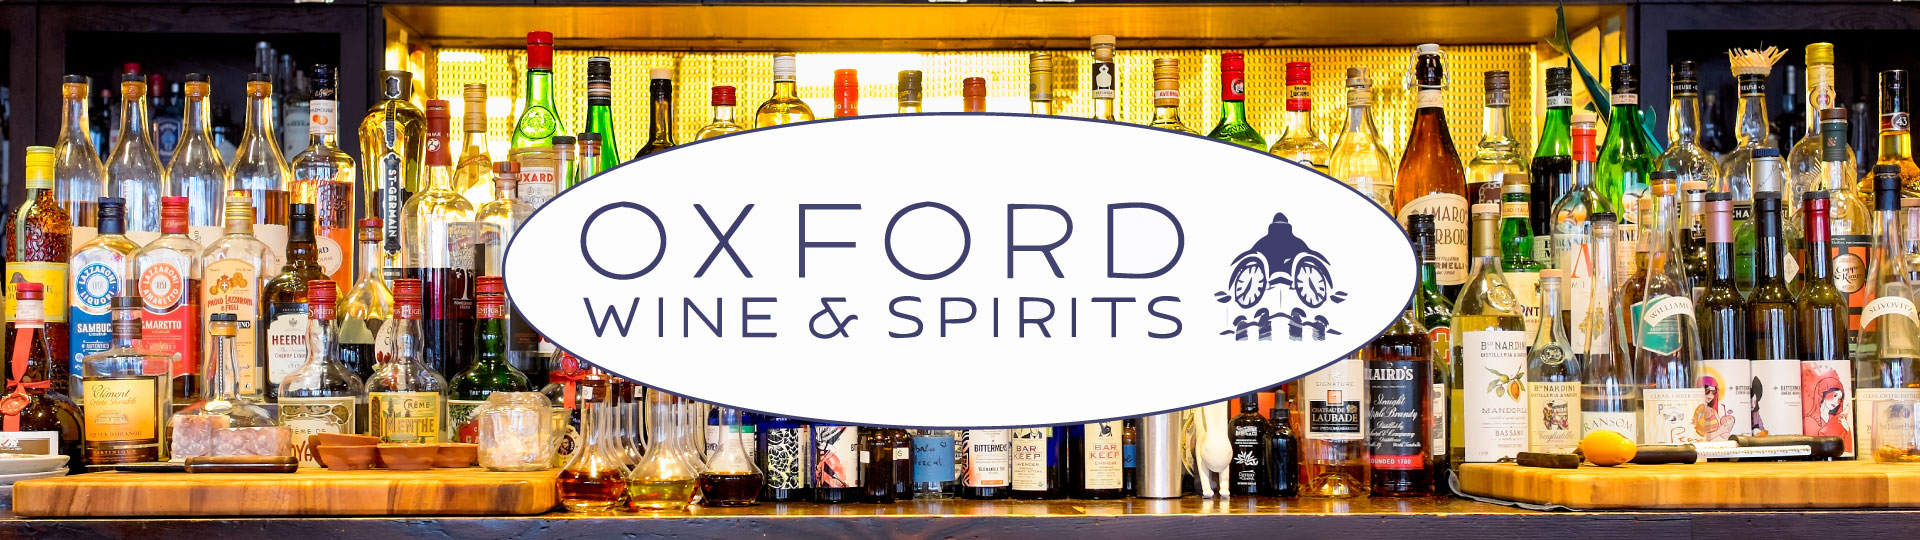 Oxford Wine and Spirits